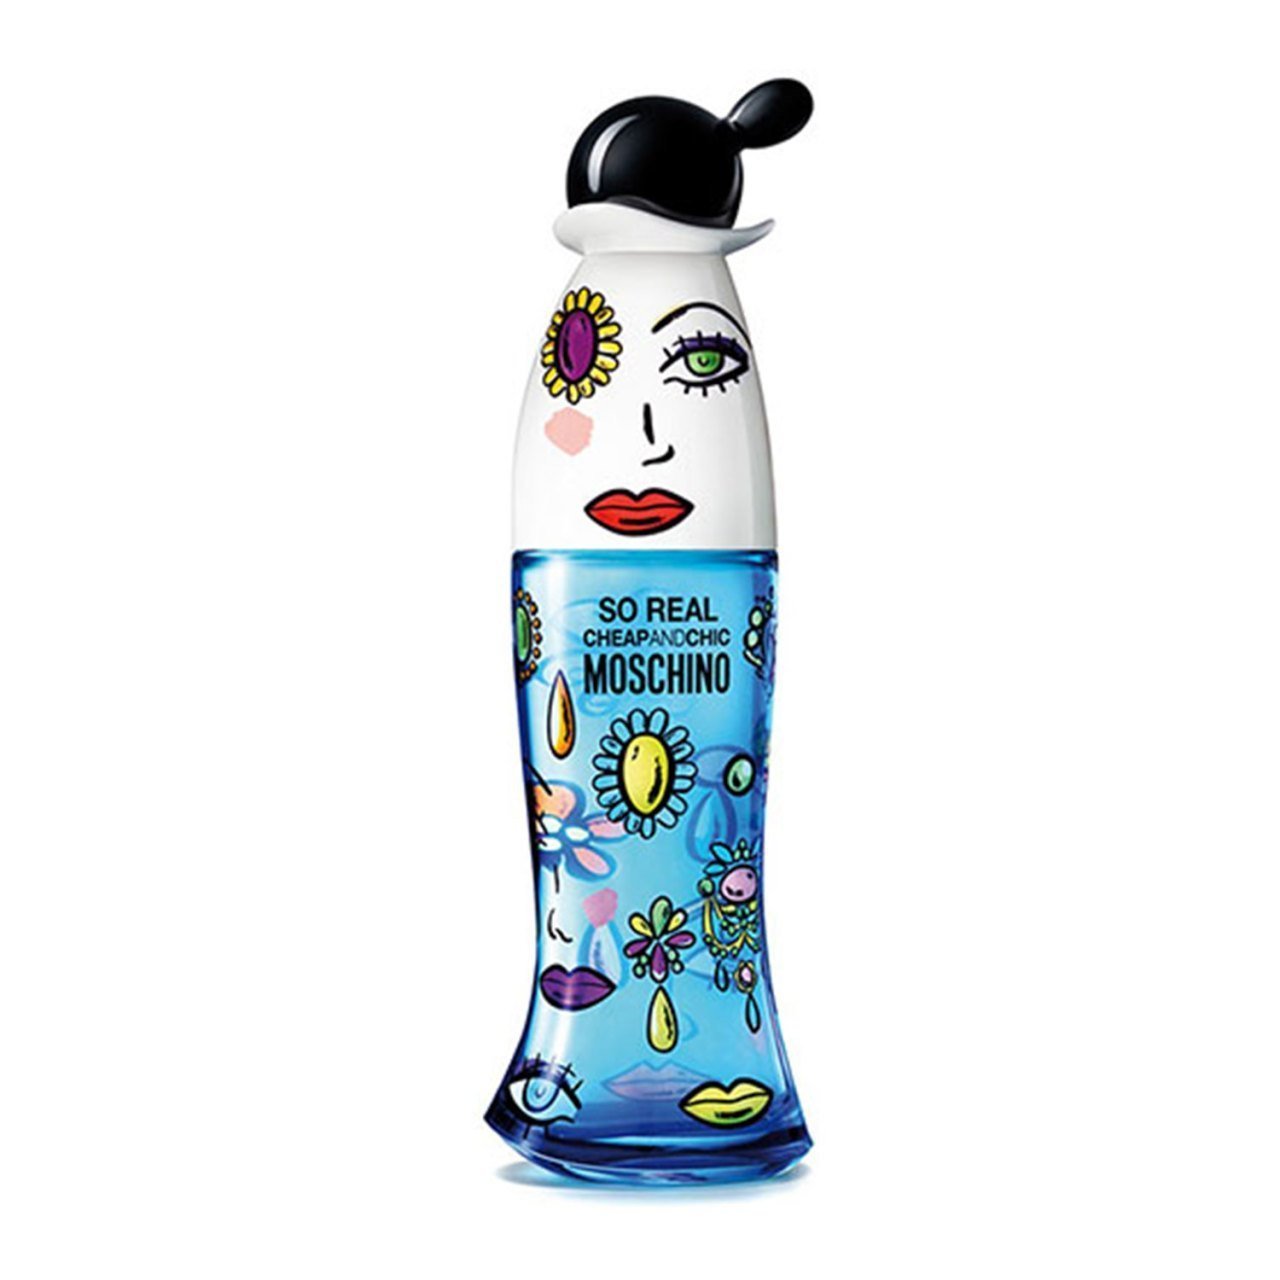 Moschino - Cheap & Chic So Real EDT 100ml